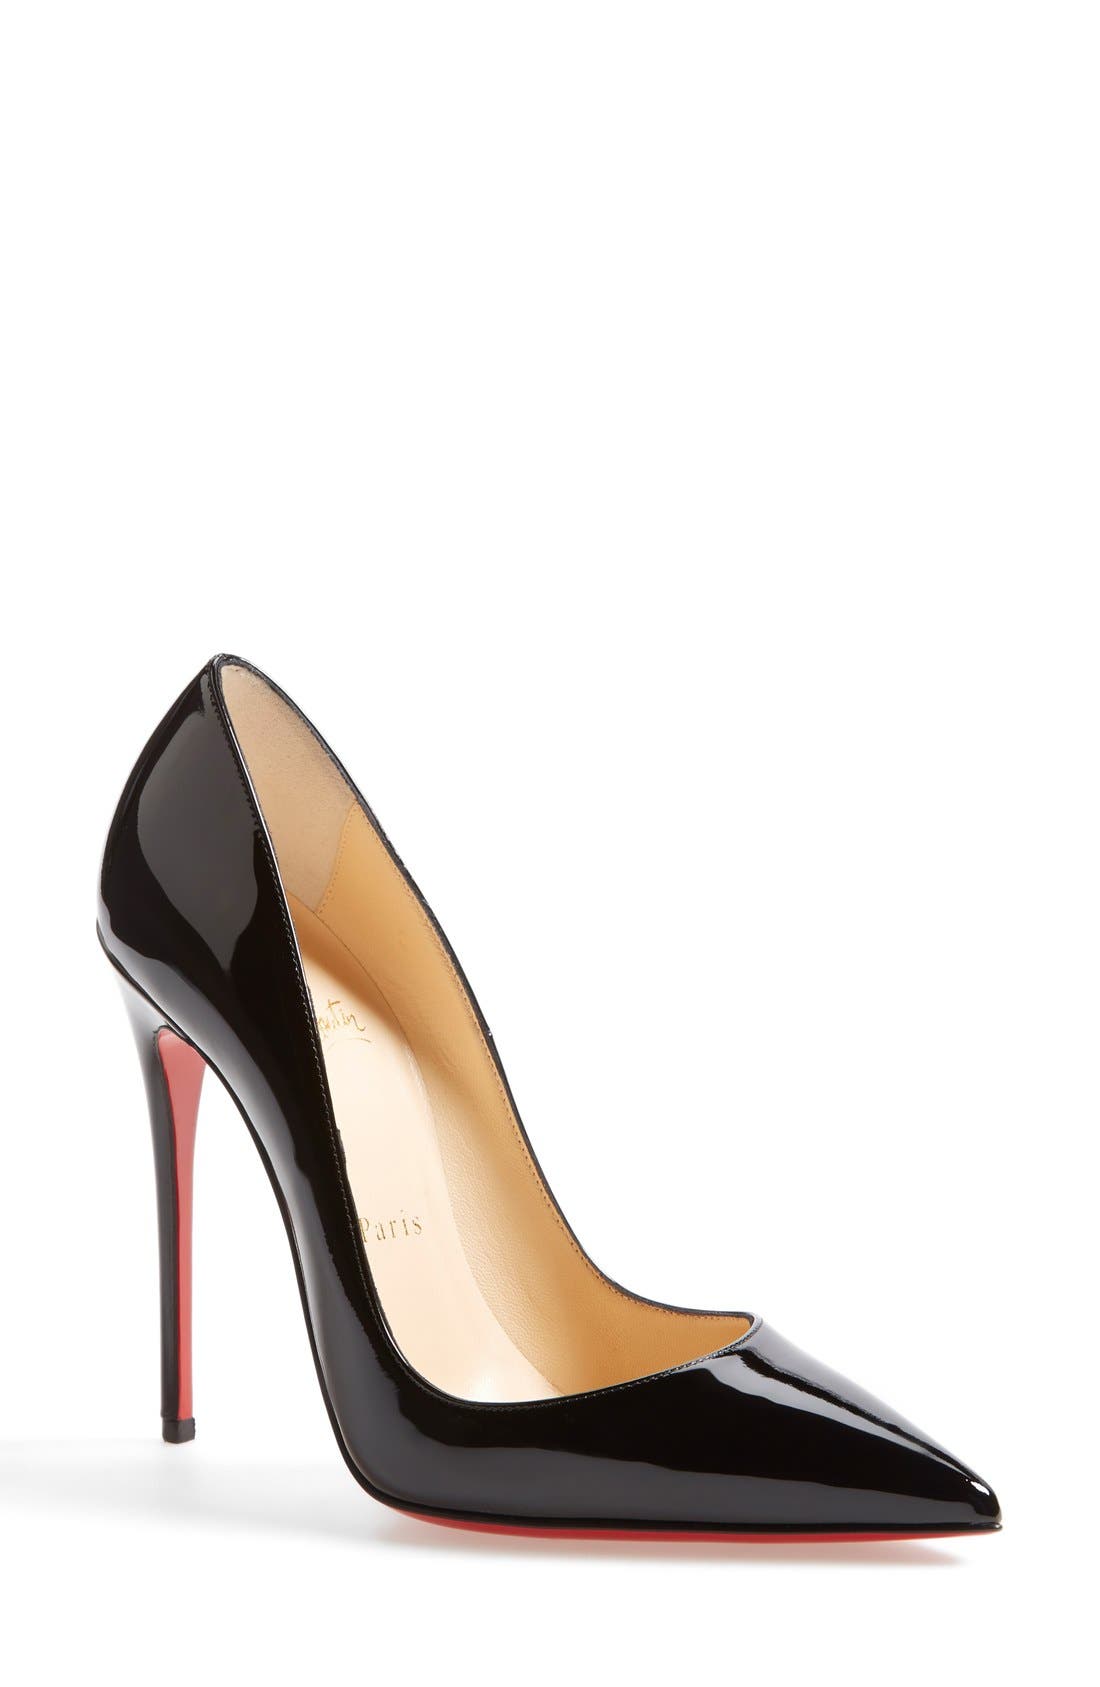 Christian Louboutin So Kate Pointed Toe Pump in Black